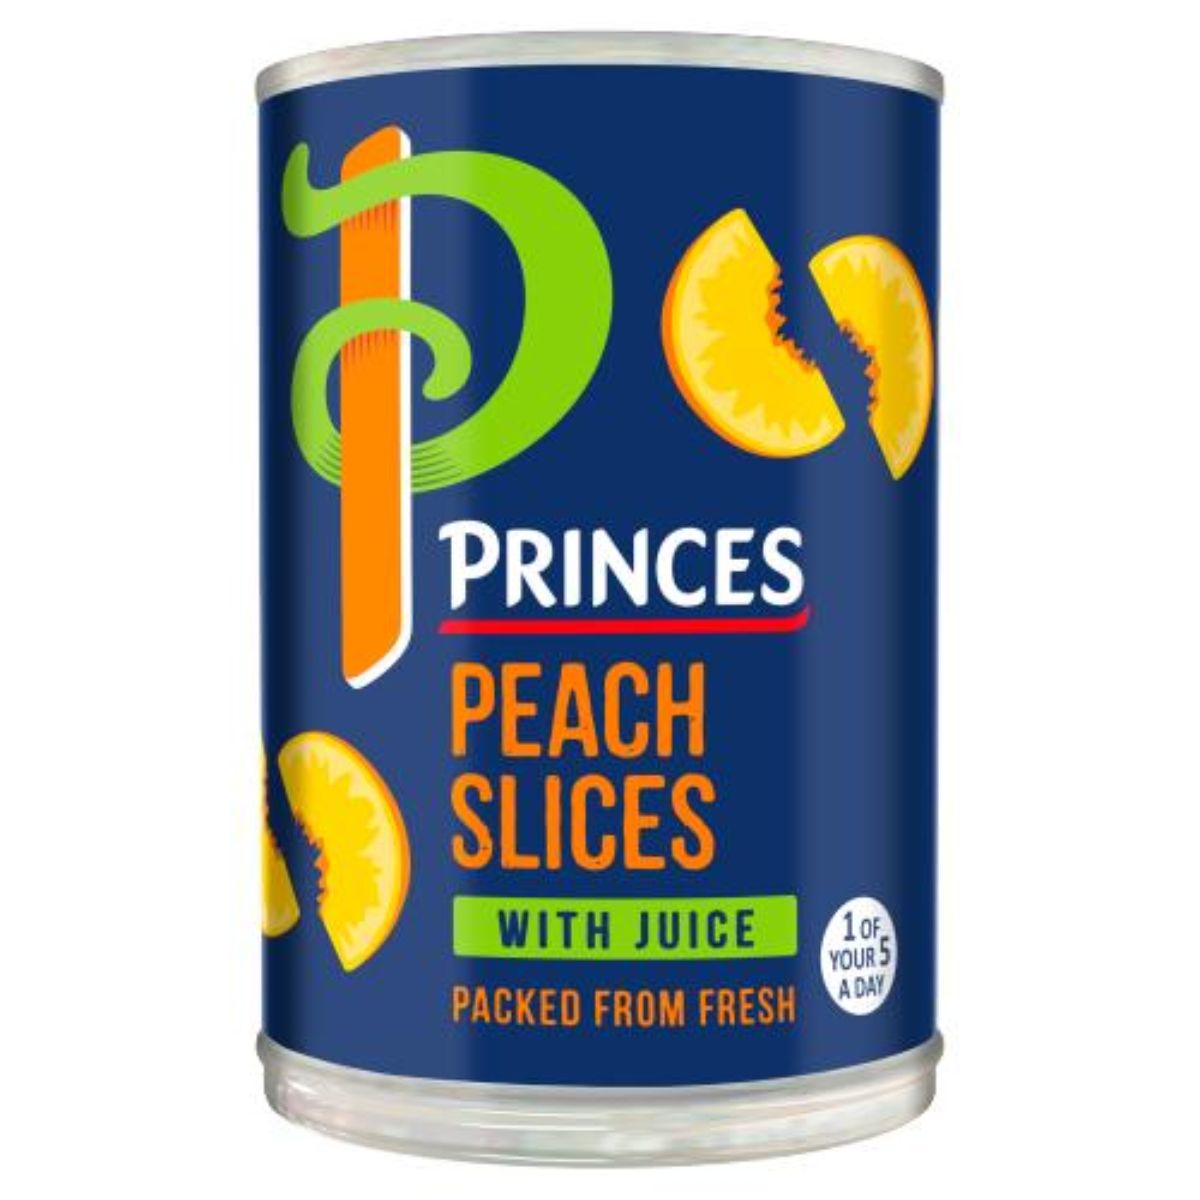 Prince peach slices with juice.